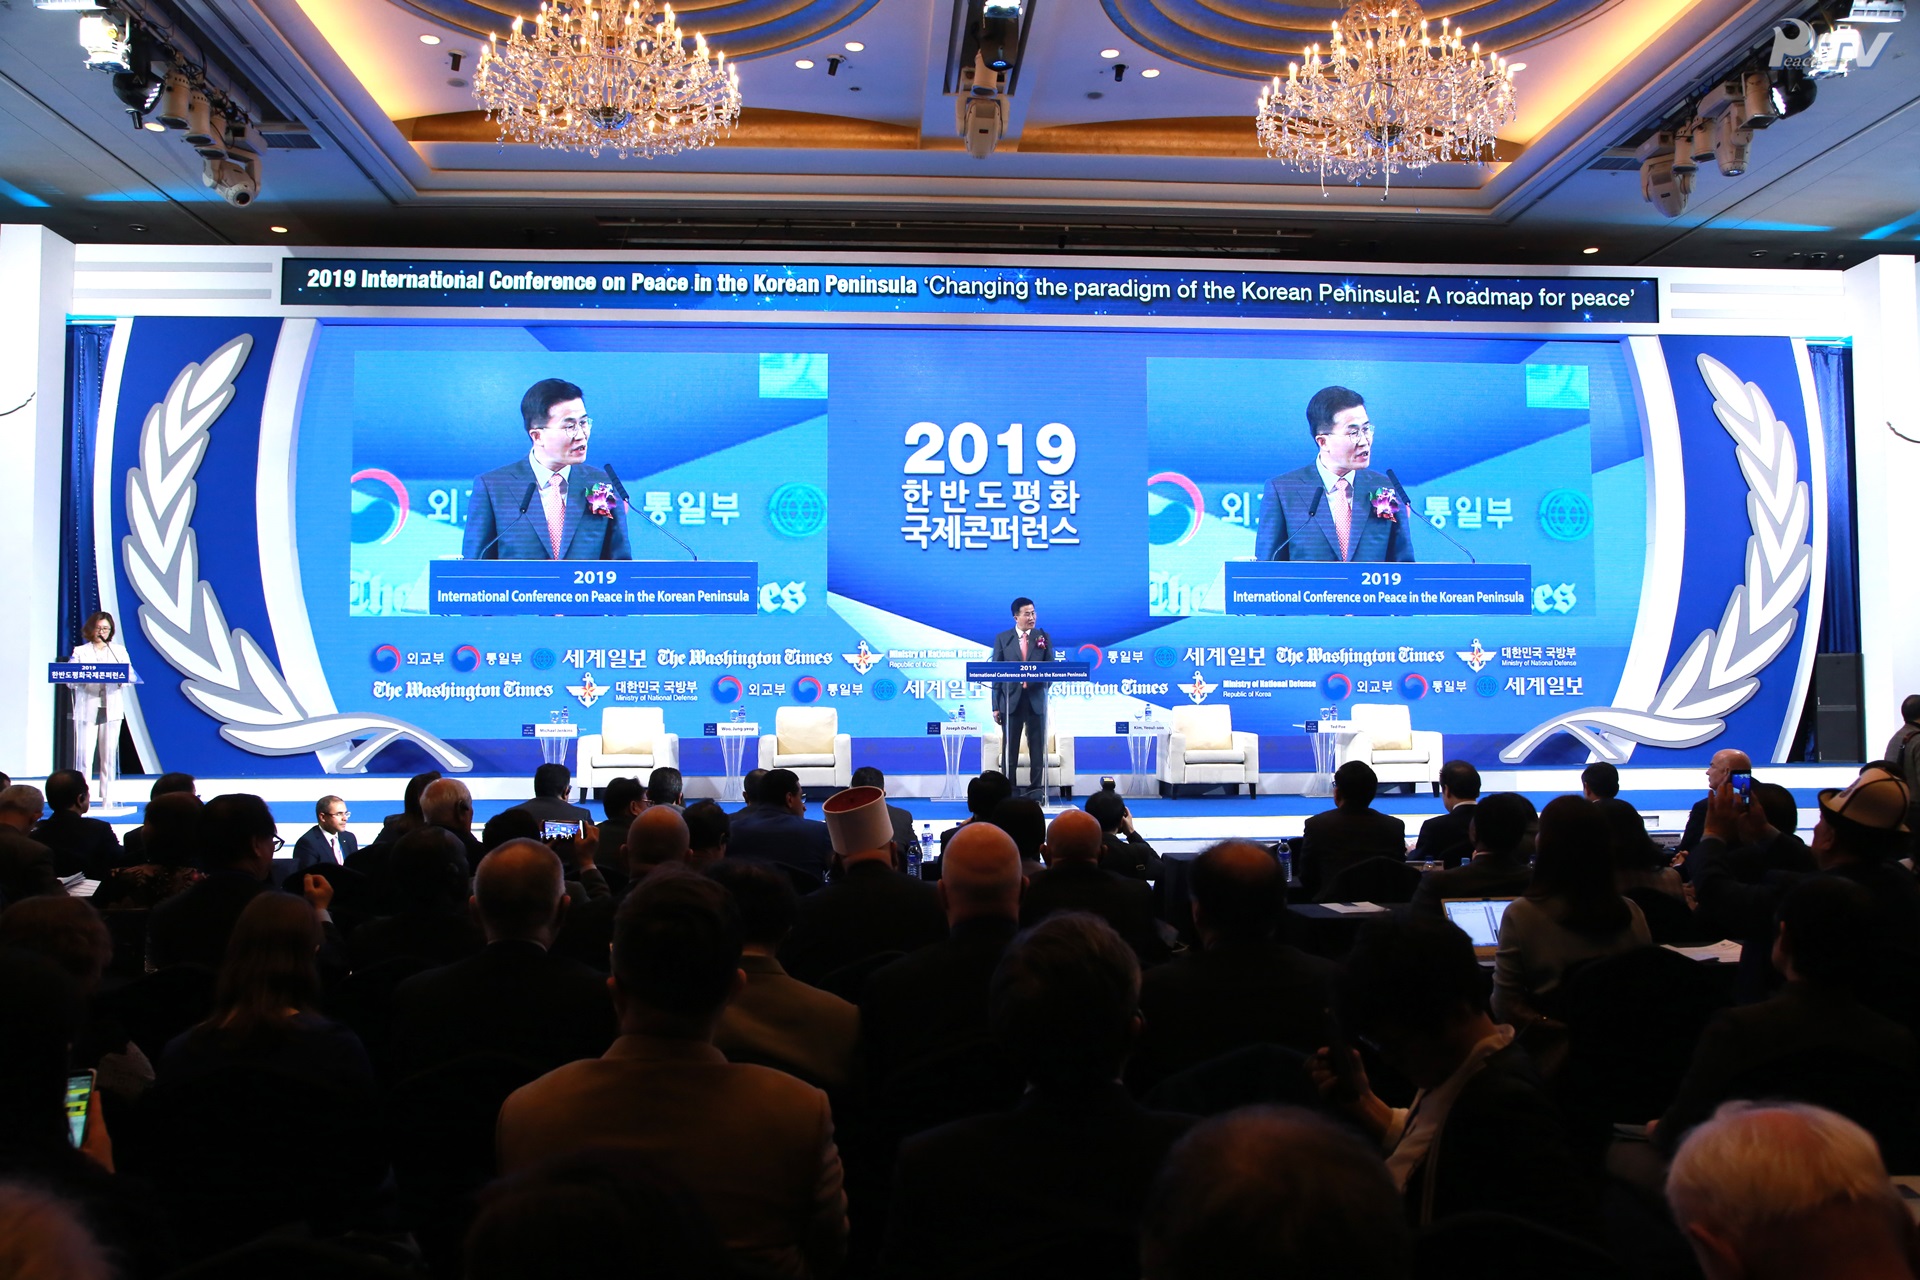 2019 International Conference for peace on the Korean Peninsula (2.9.2019)